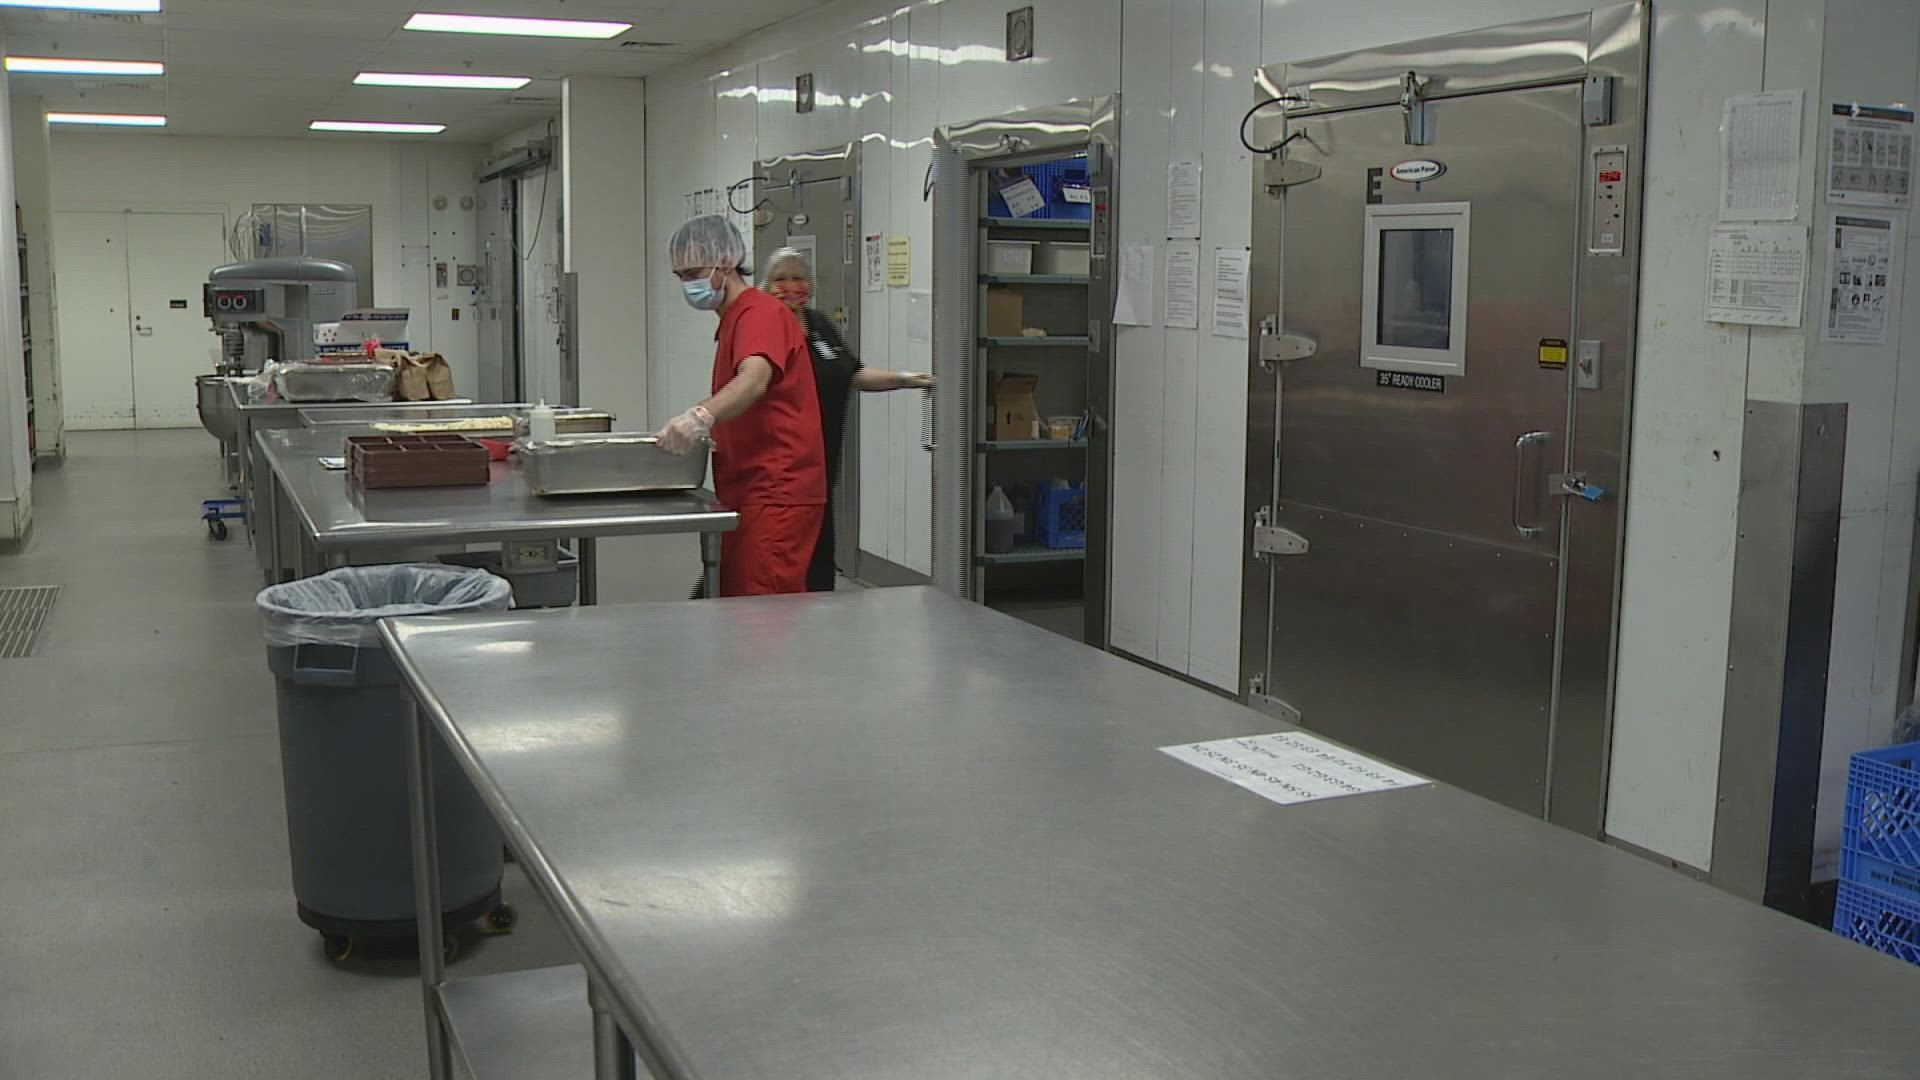 The program aims to give inmates skills they can use to work in the restaurant industry in the hopes of keeping them out of the prison system in the future.